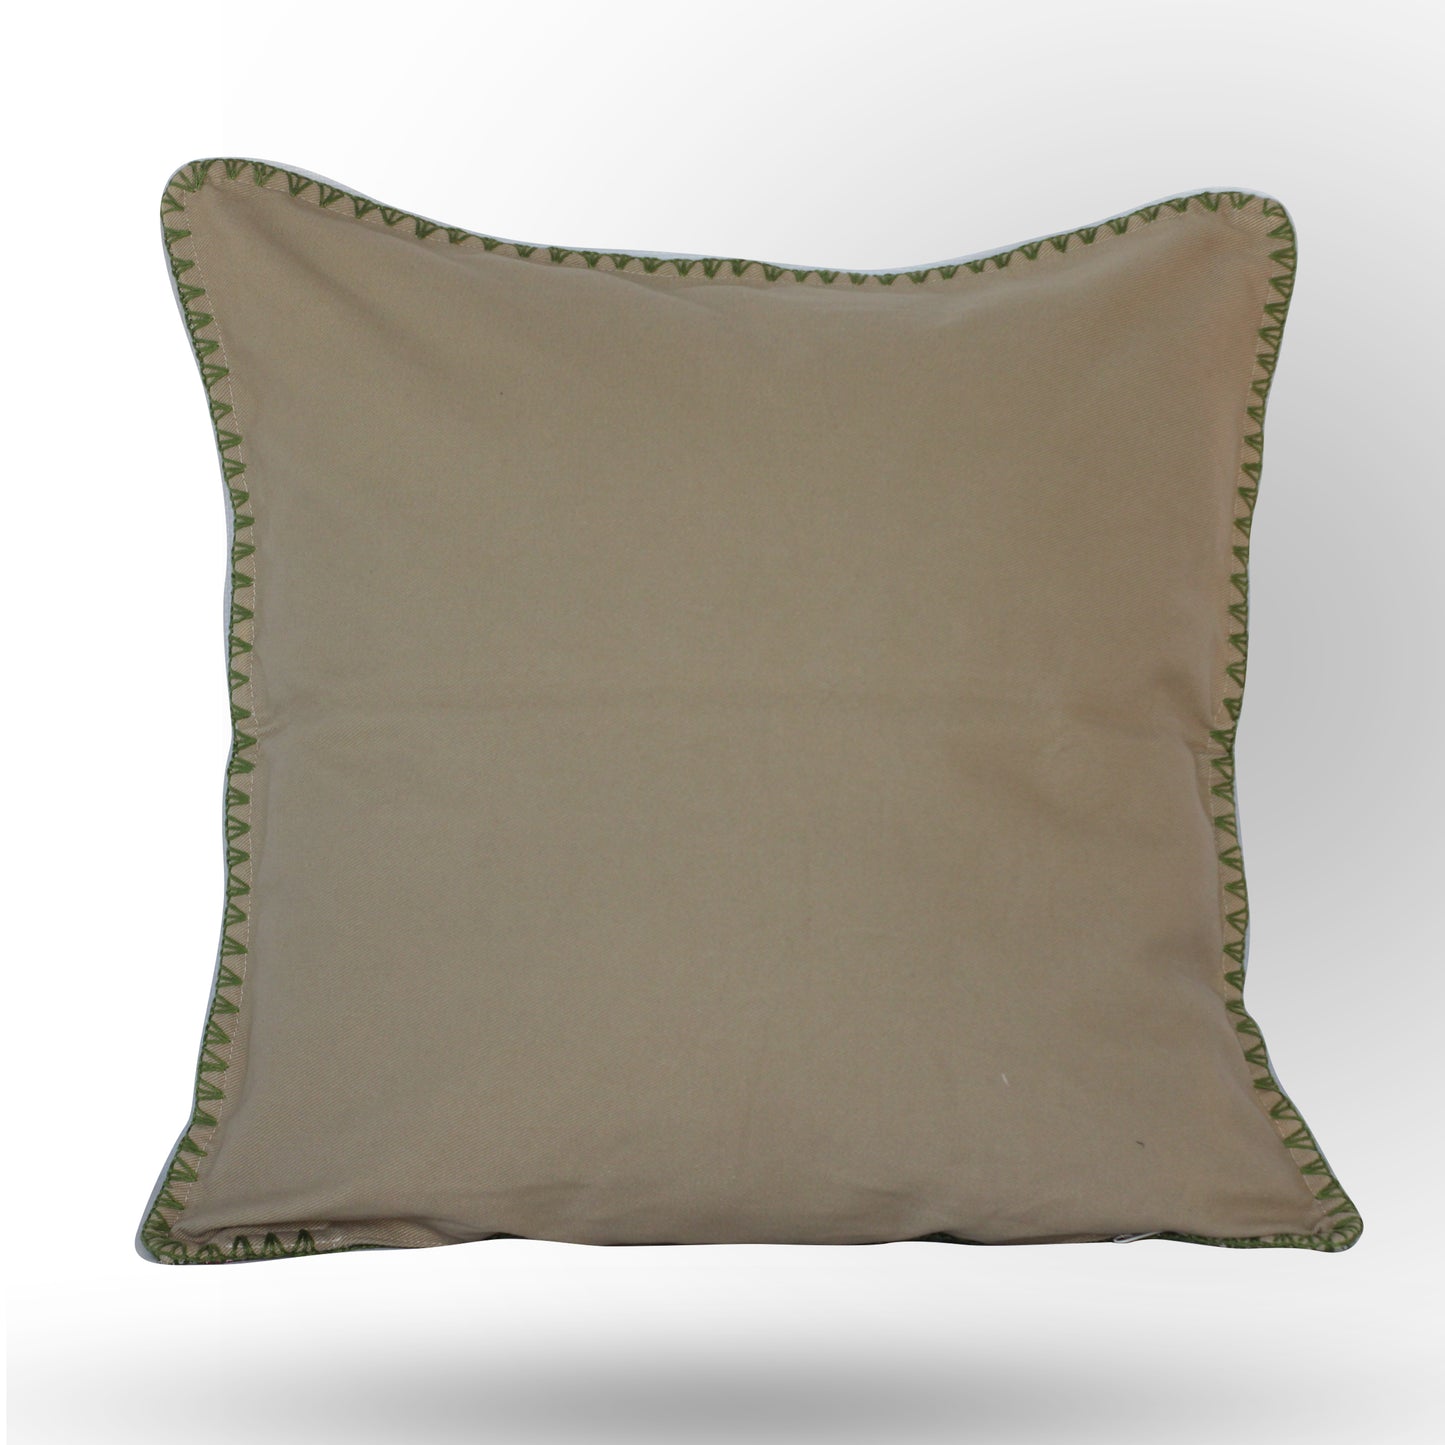 PILLOW COVER 20x20